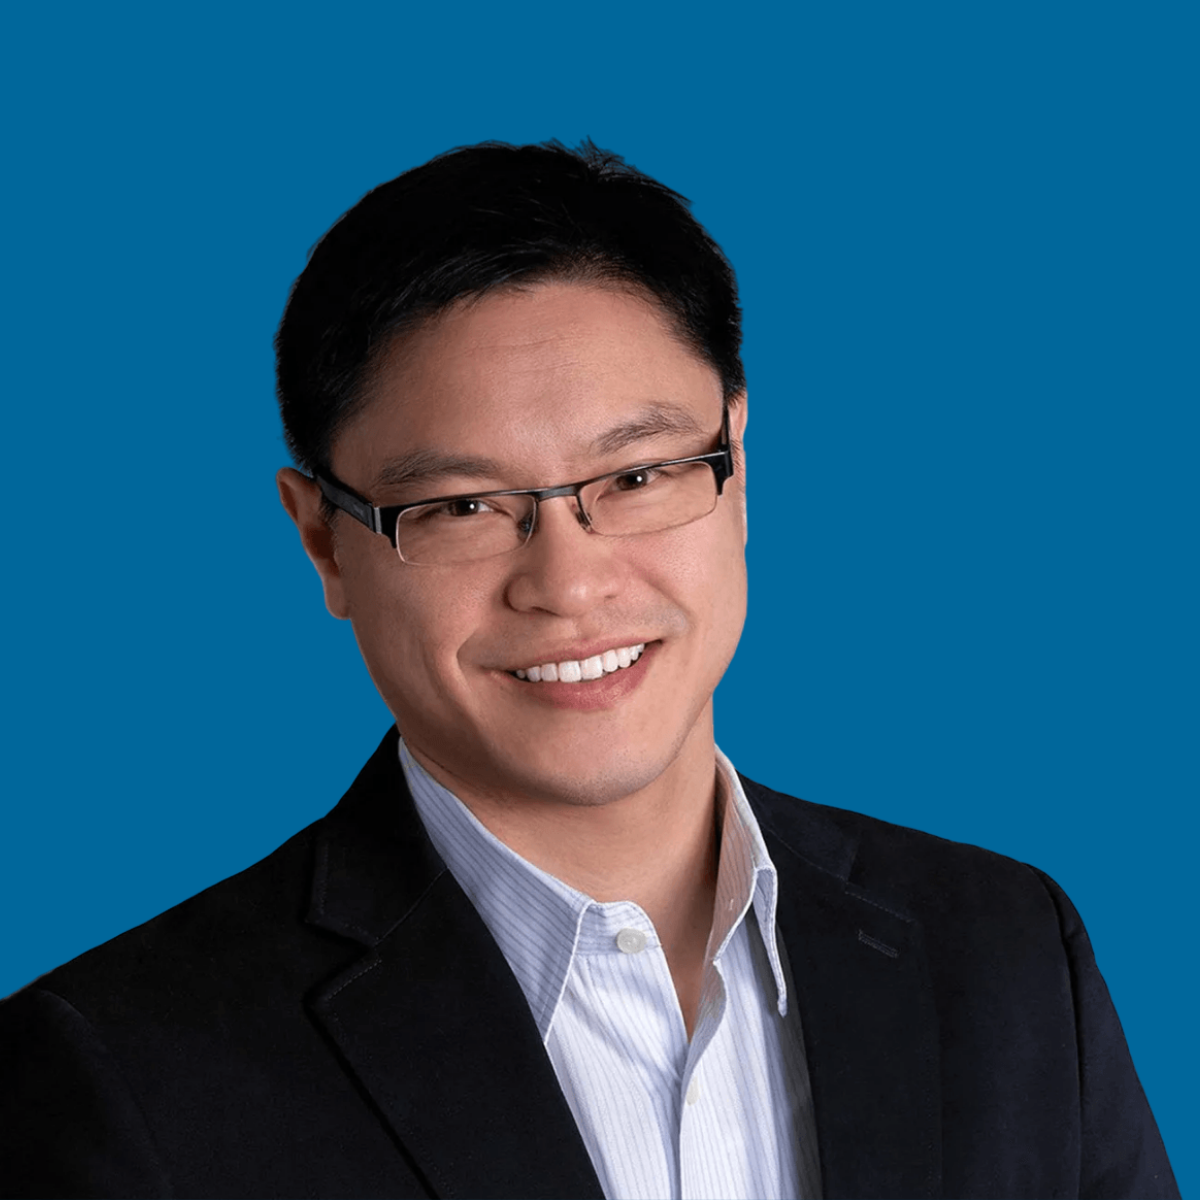 Jason Fung smiling at camera against blue background